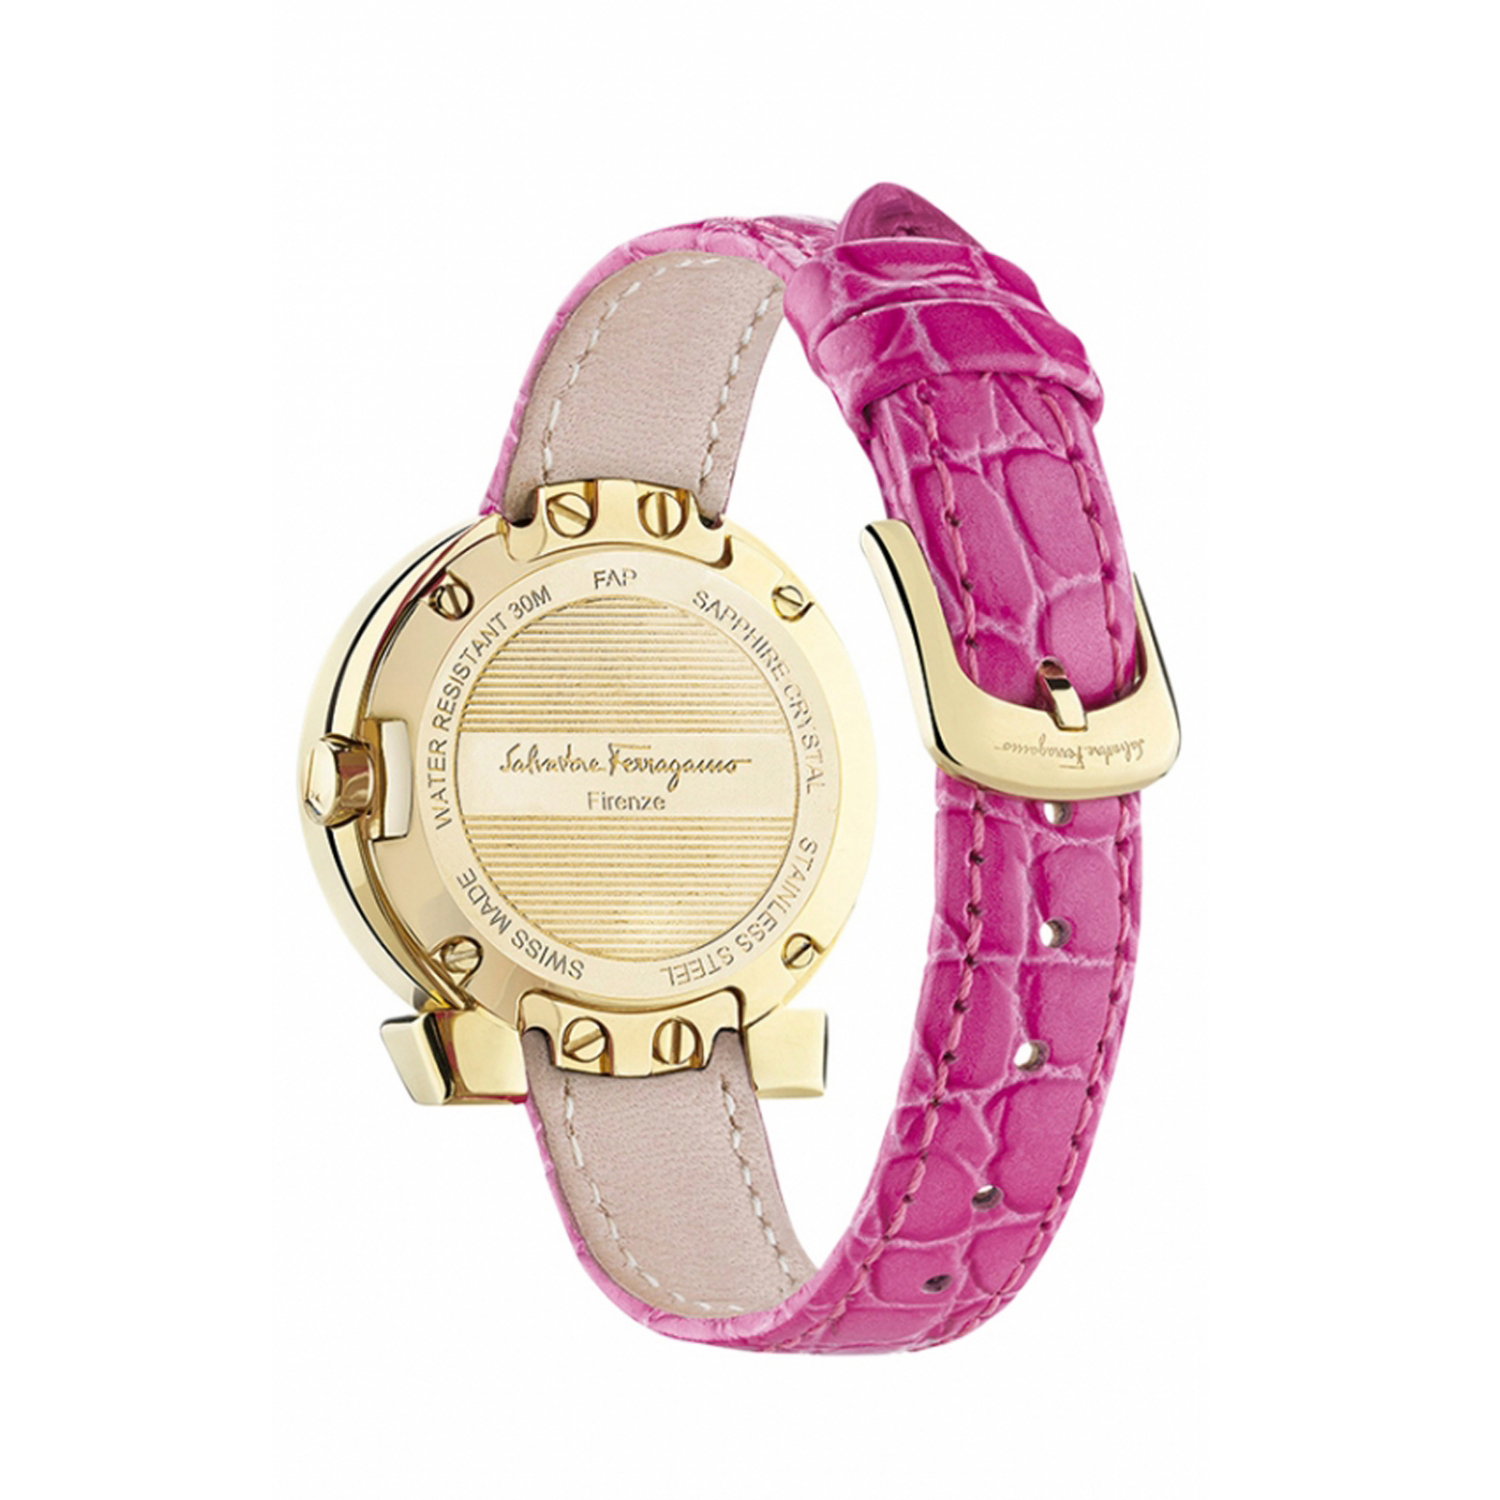 GANCINO STAINLESS PINK LEATHER LADIES WATCH FAP050016, 30MM